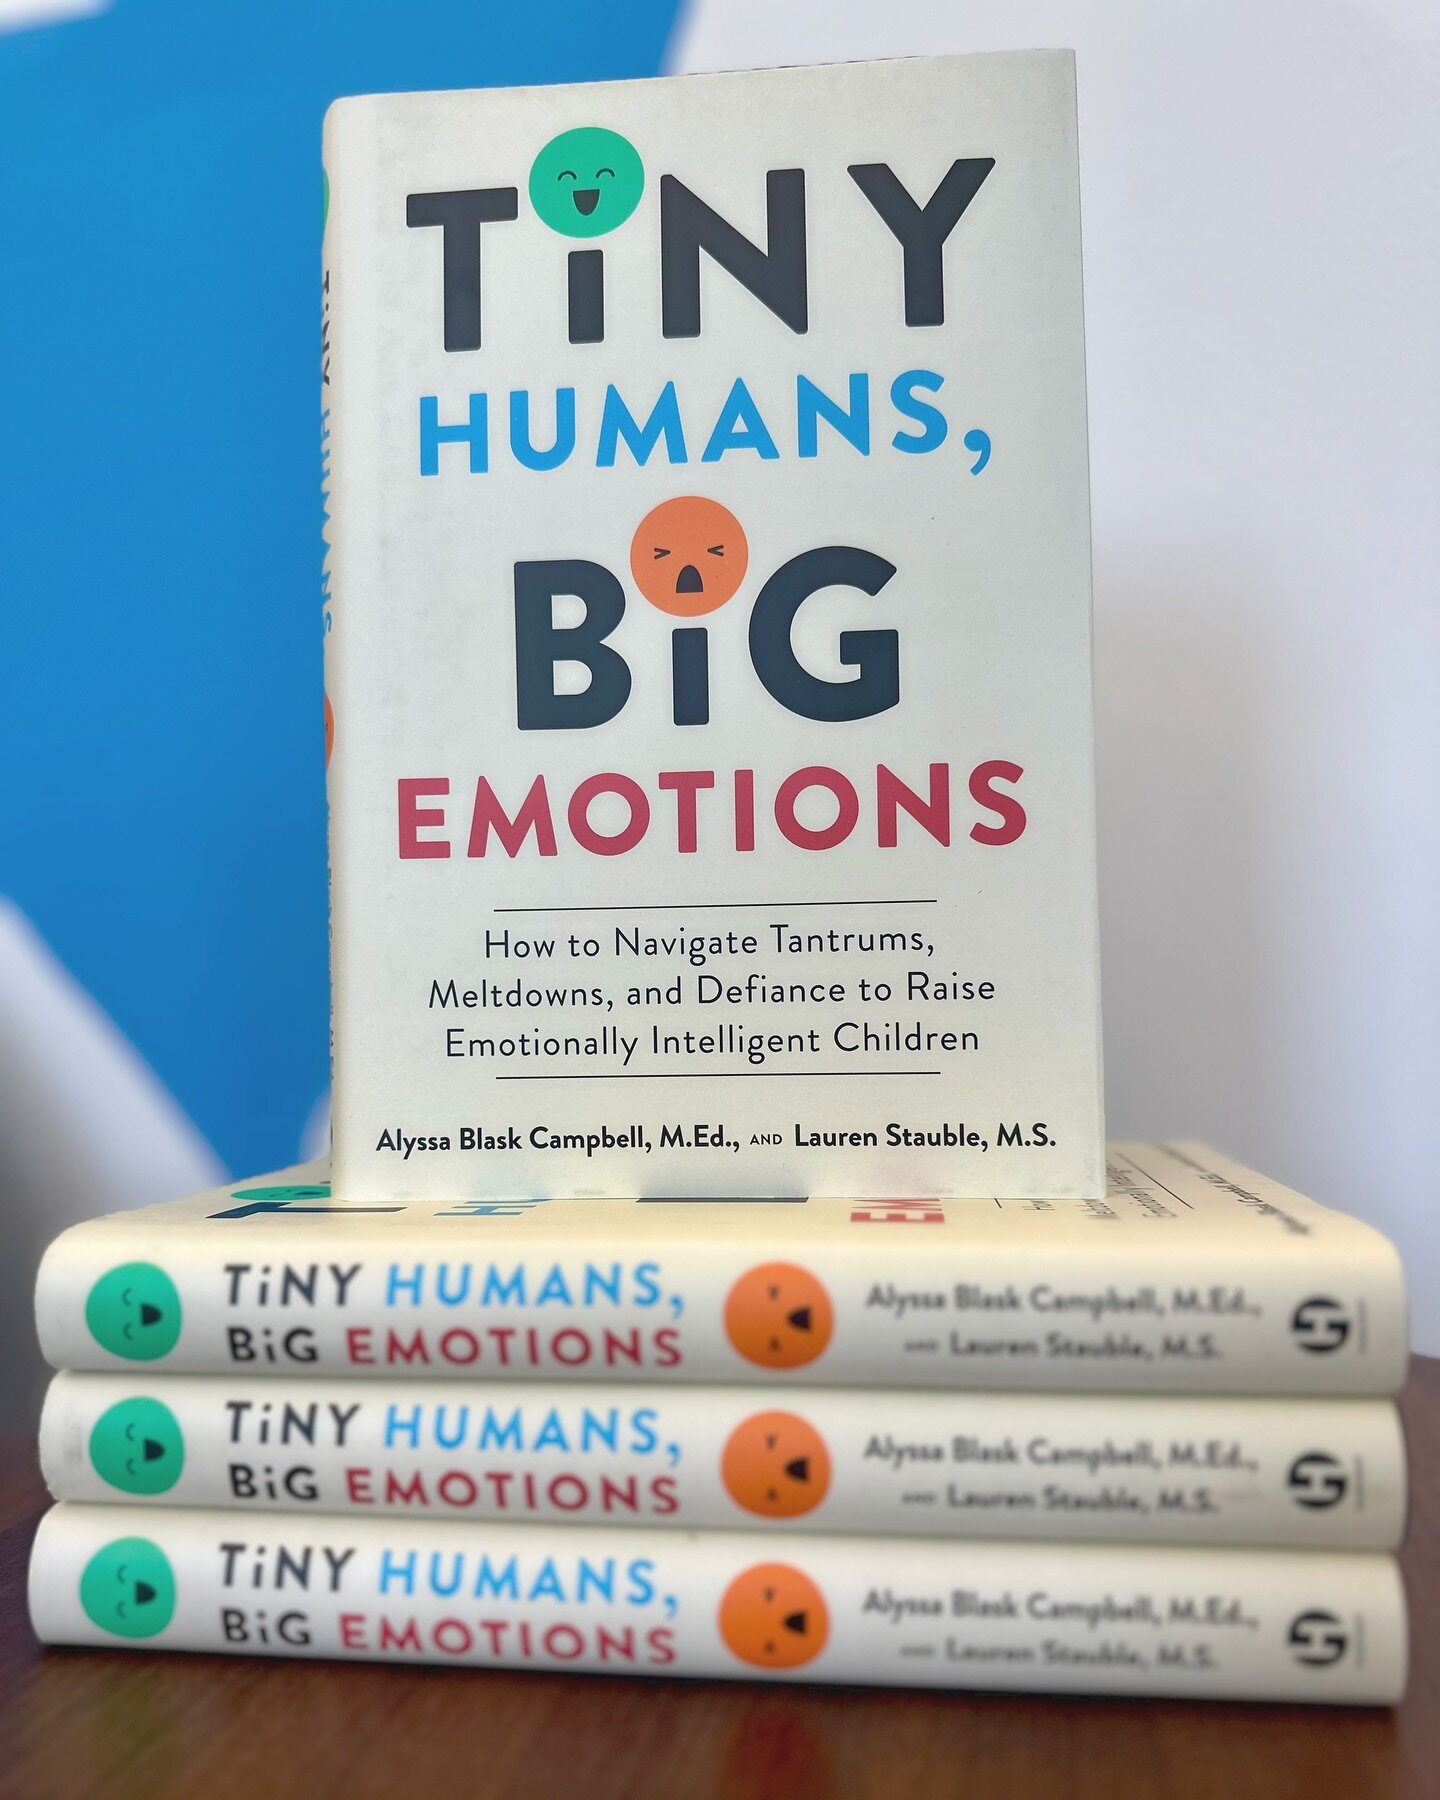 We are looking forward to Book Club with the Little City community! 

Our inaugural &lsquo;One Book, One School&rsquo; event begins with &ldquo;Tiny Humans, Big Emotions&rdquo; by Alyssa Blask Campbell and Lauren Stauble. Follow the authors at @seed.